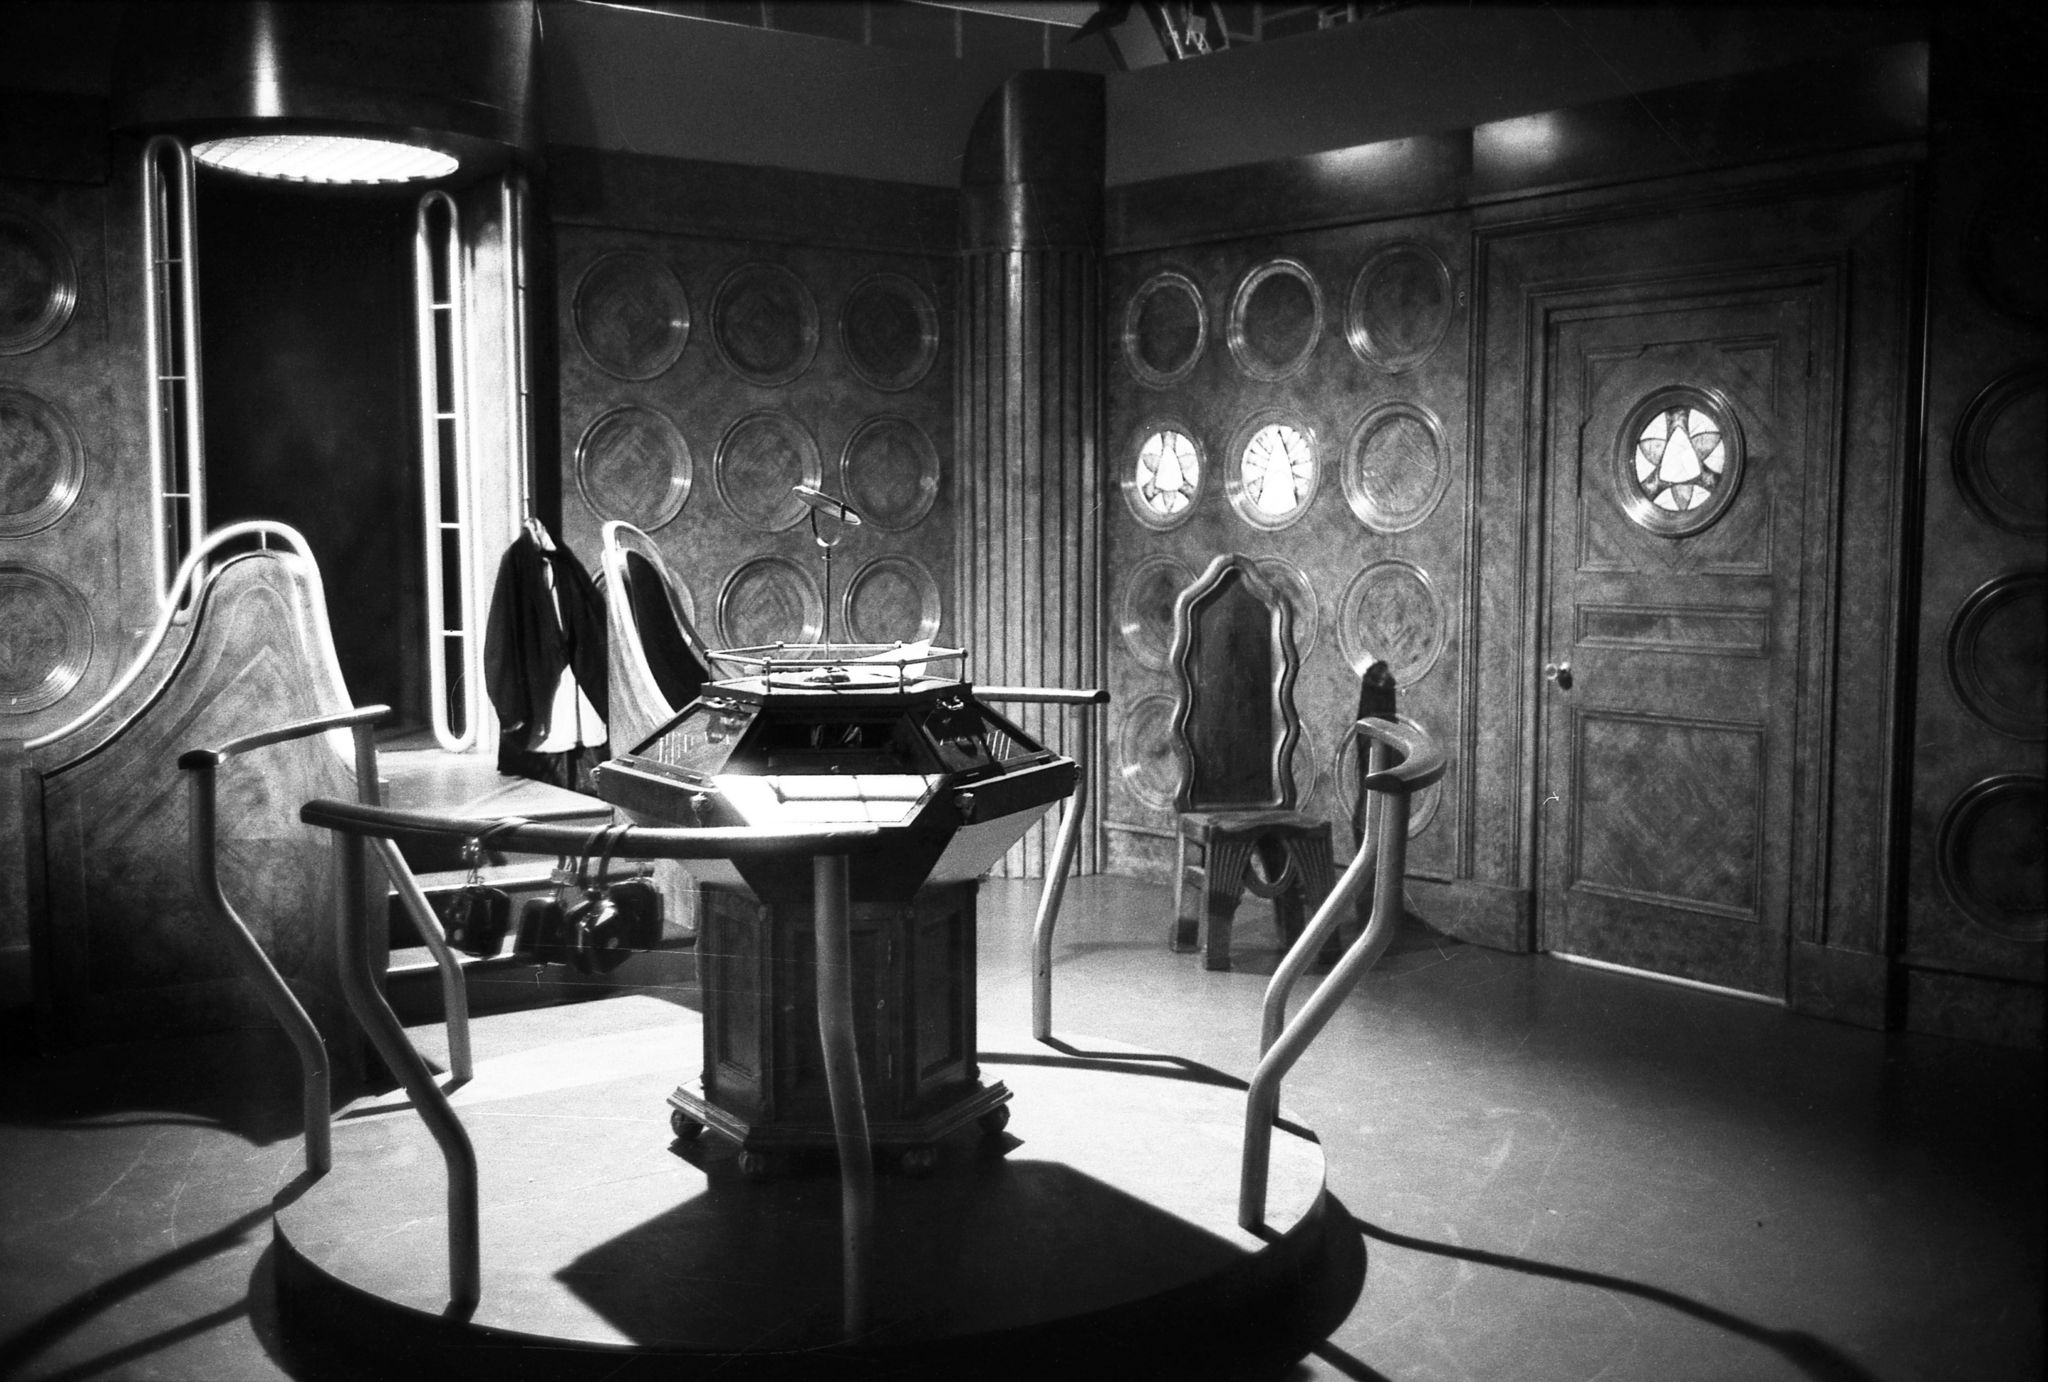 A view of the inside of Doctor Who's time-machine, the Tardis, in Dr Who adventure 'The Masque of Mandragora' 